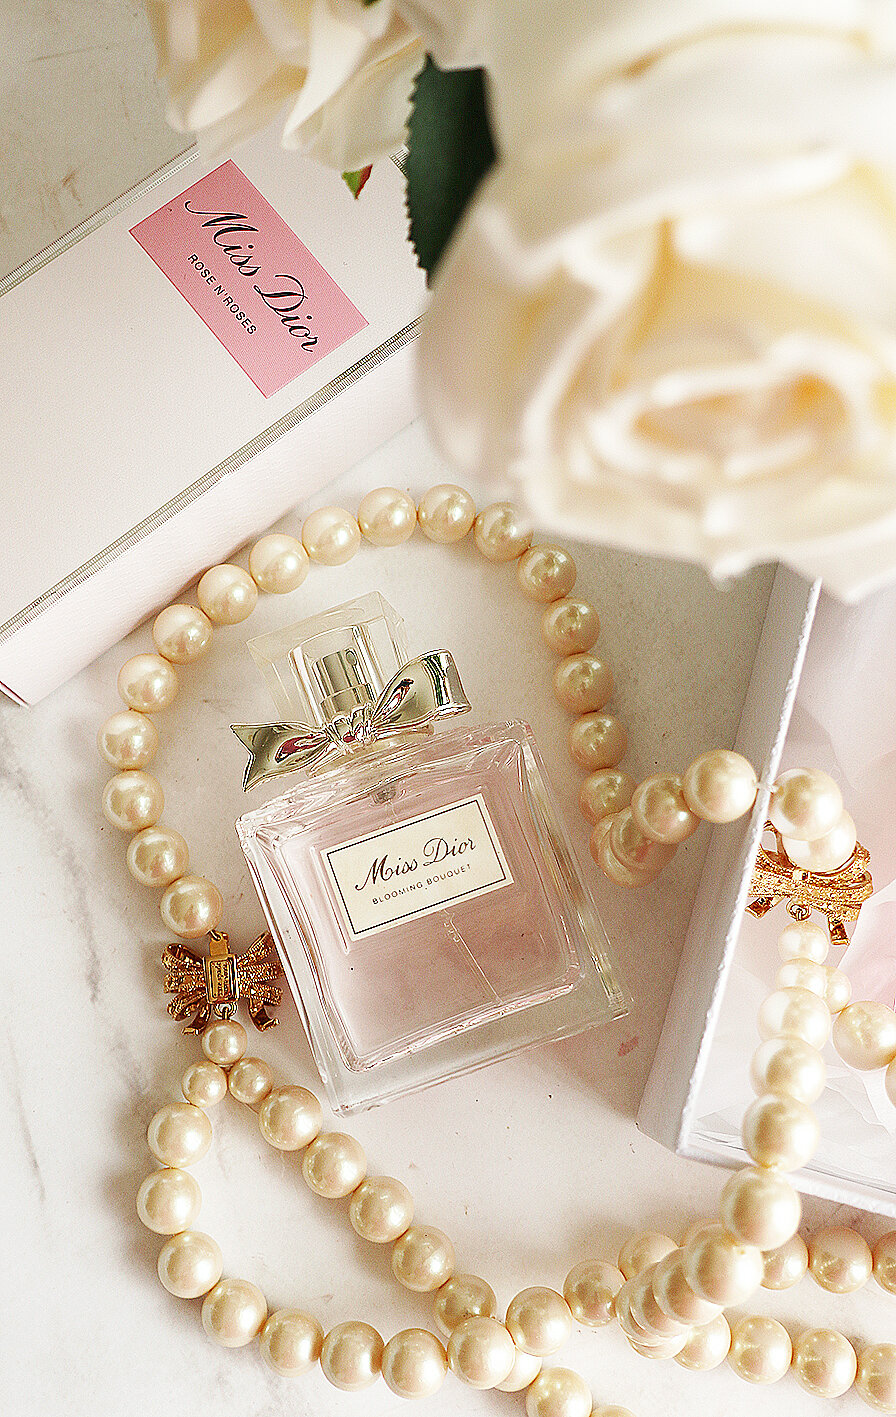 Today's Fragrance: Miss Dior Rose n' Roses — The Reyna Edit